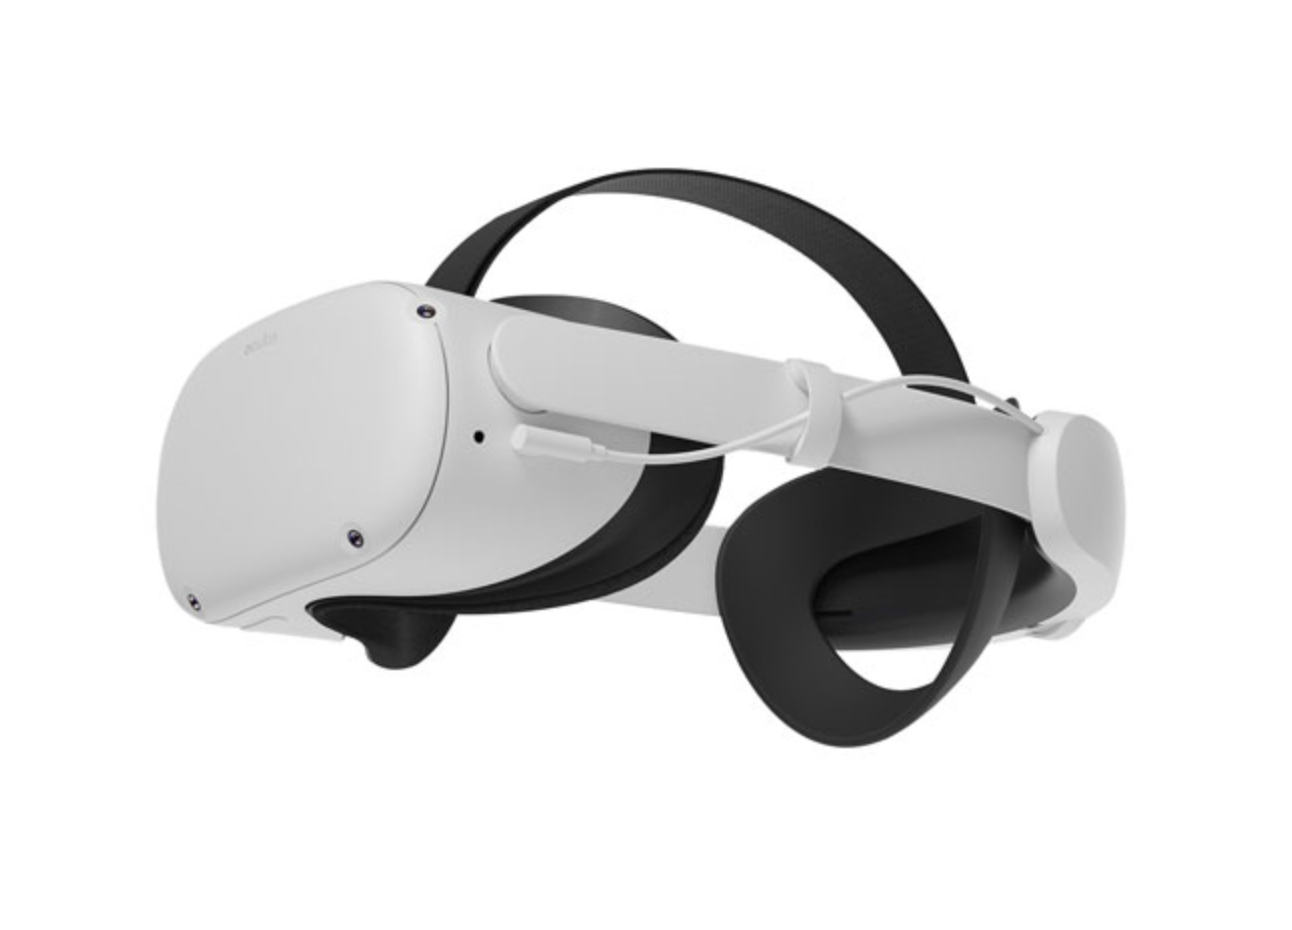 bred arv halskæde Accessories you need for your Oculus Quest 2 | Best Buy Blog